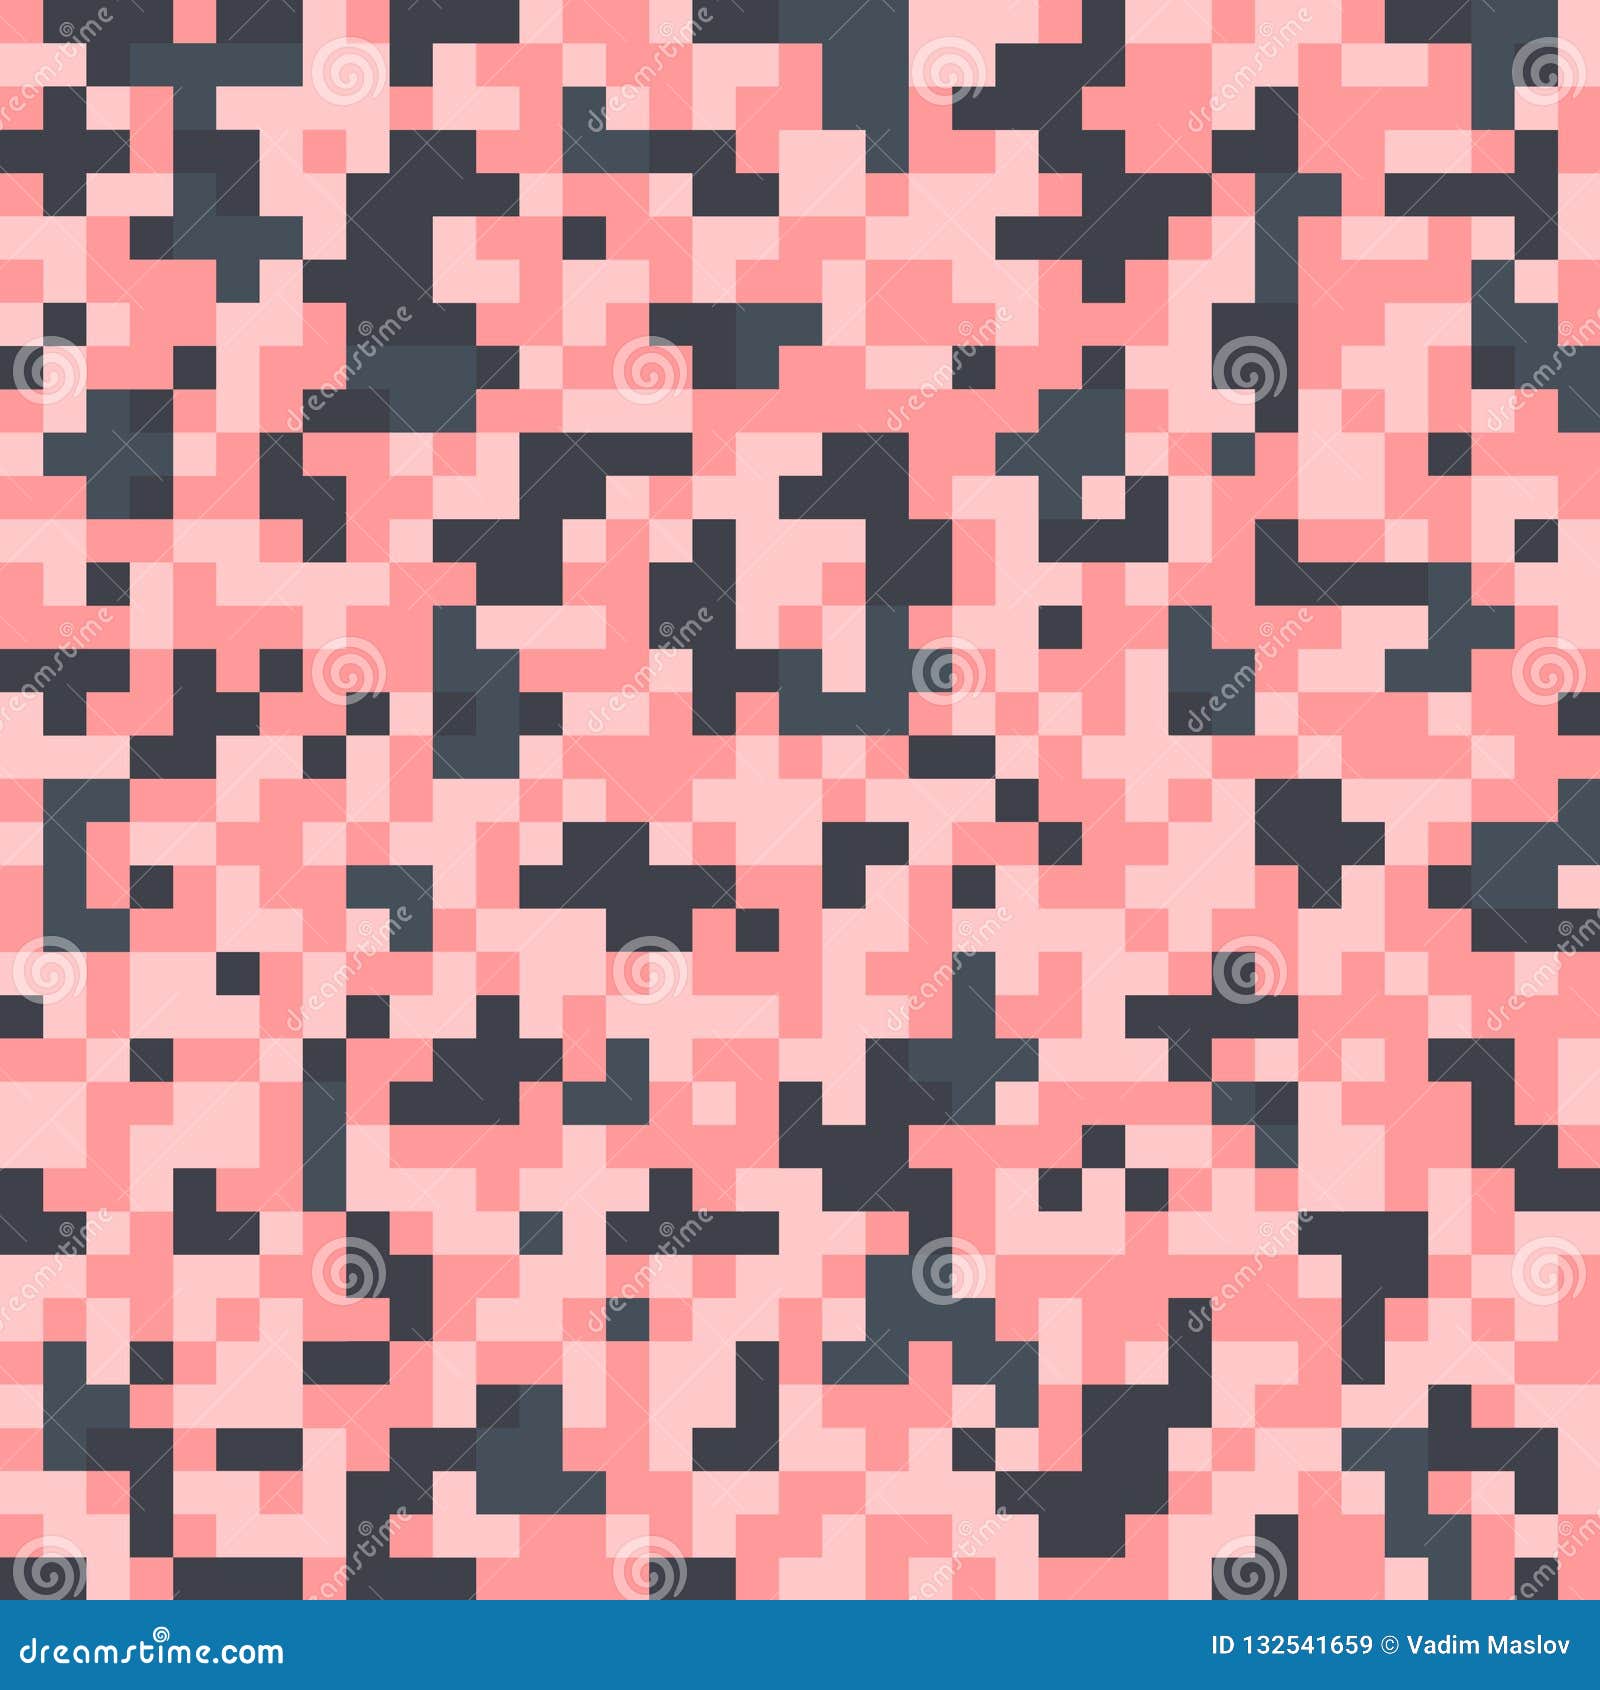 Pixel seamless pattern with pink squares. Vector background.